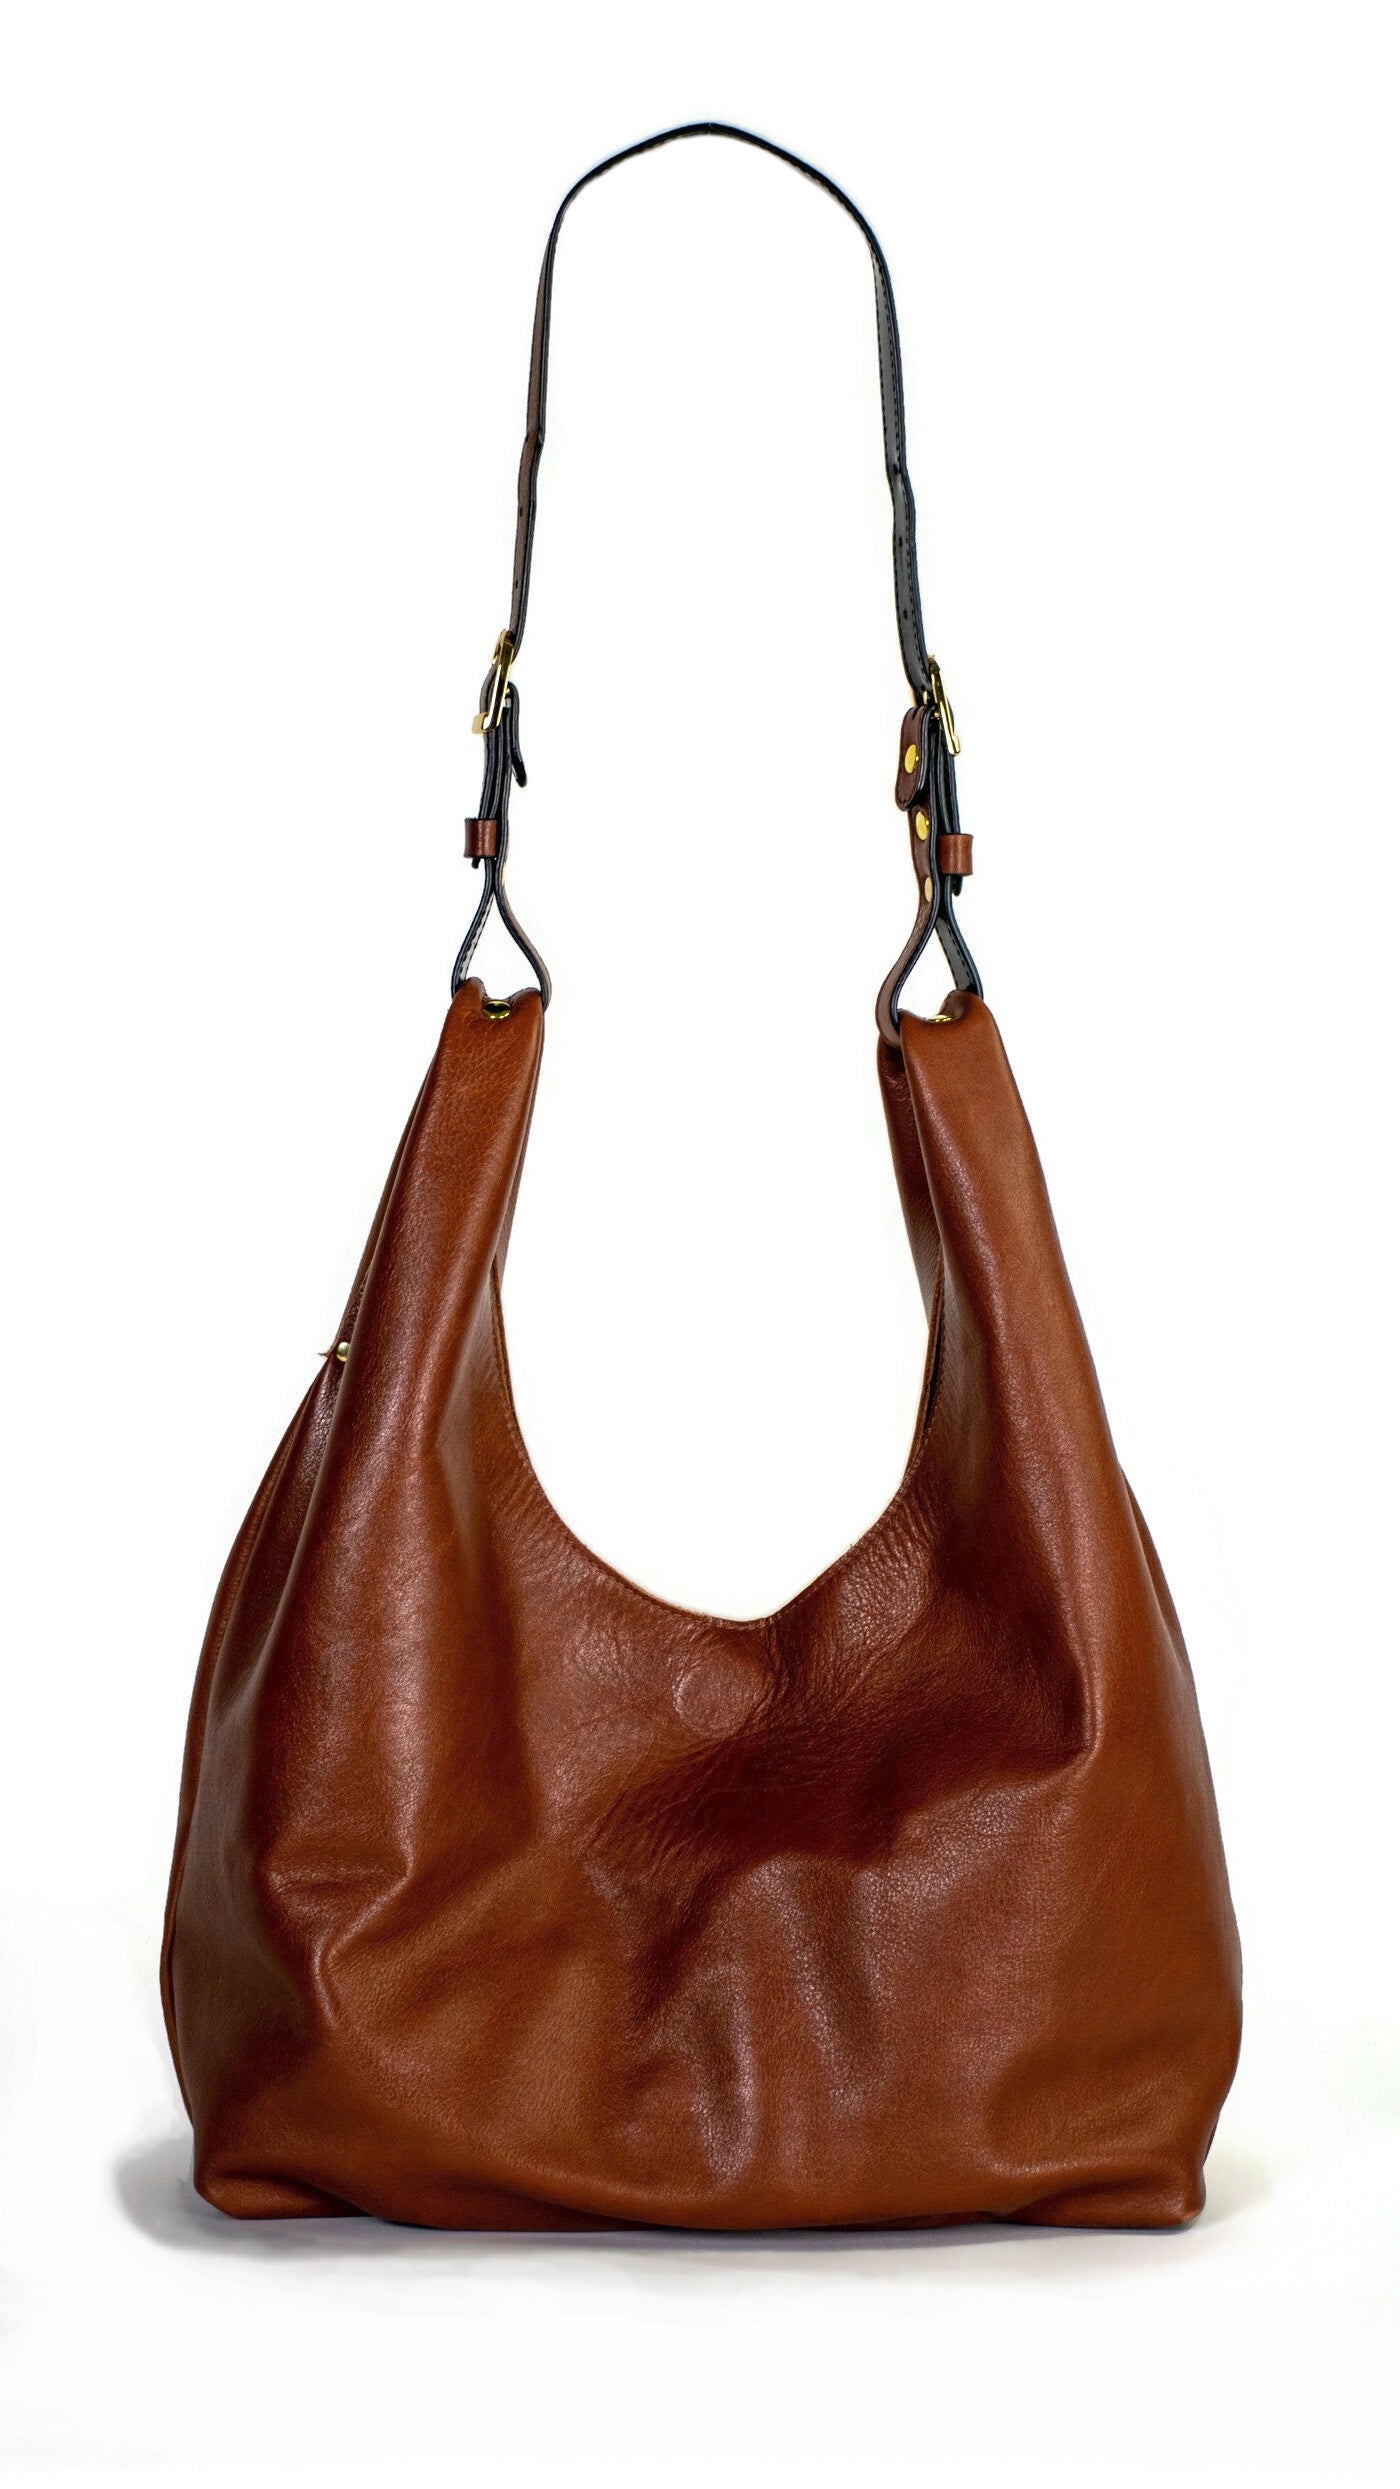 Back of Cognac brown leather hobo shoulder bag handcrafted in Italian calfskin by slow fashion indie designer Liv McClintock. Made in Wilmington Delaware USA.